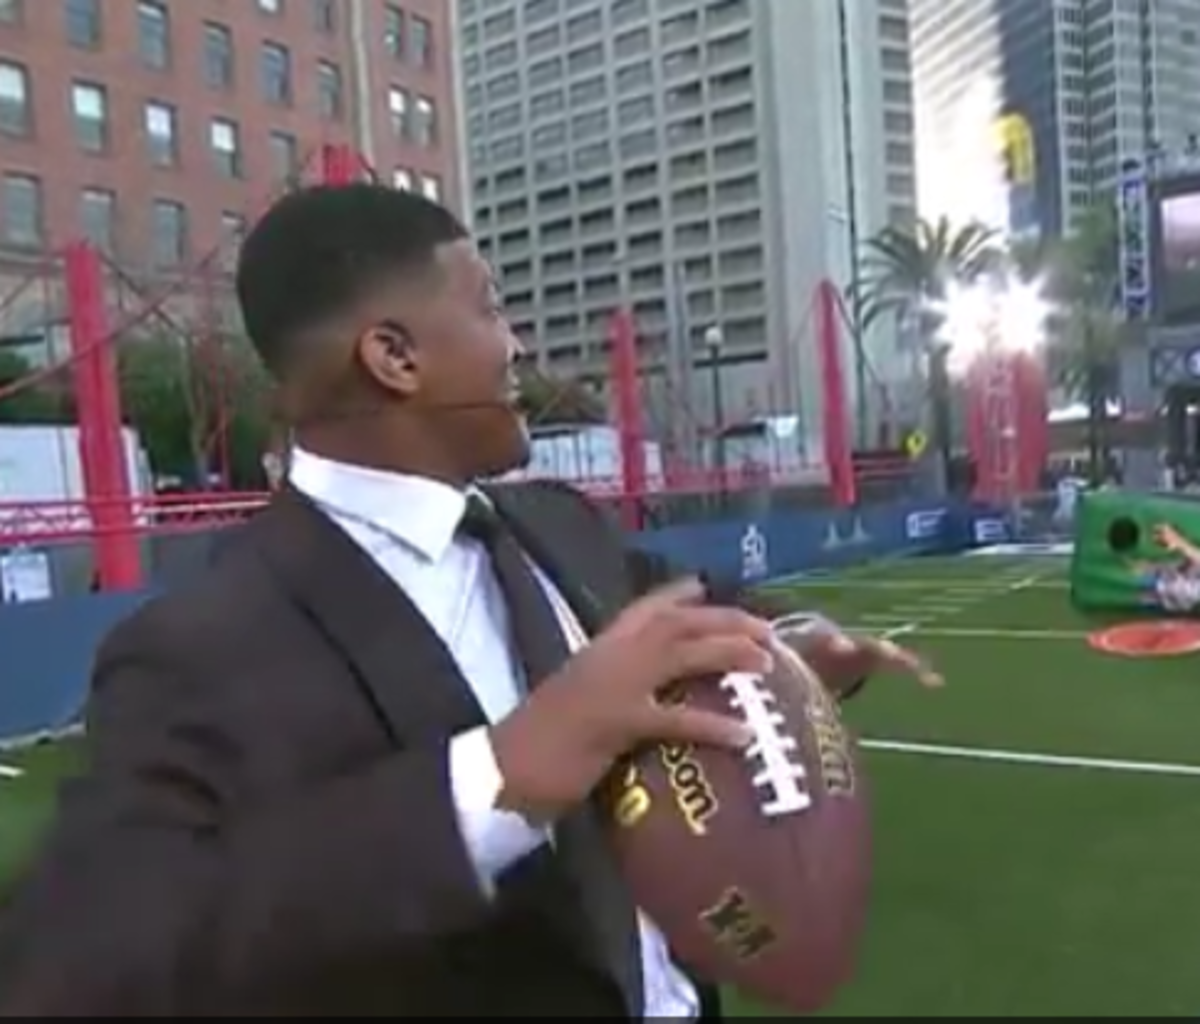 Jameis Winston dominates throwing competition in a suit.